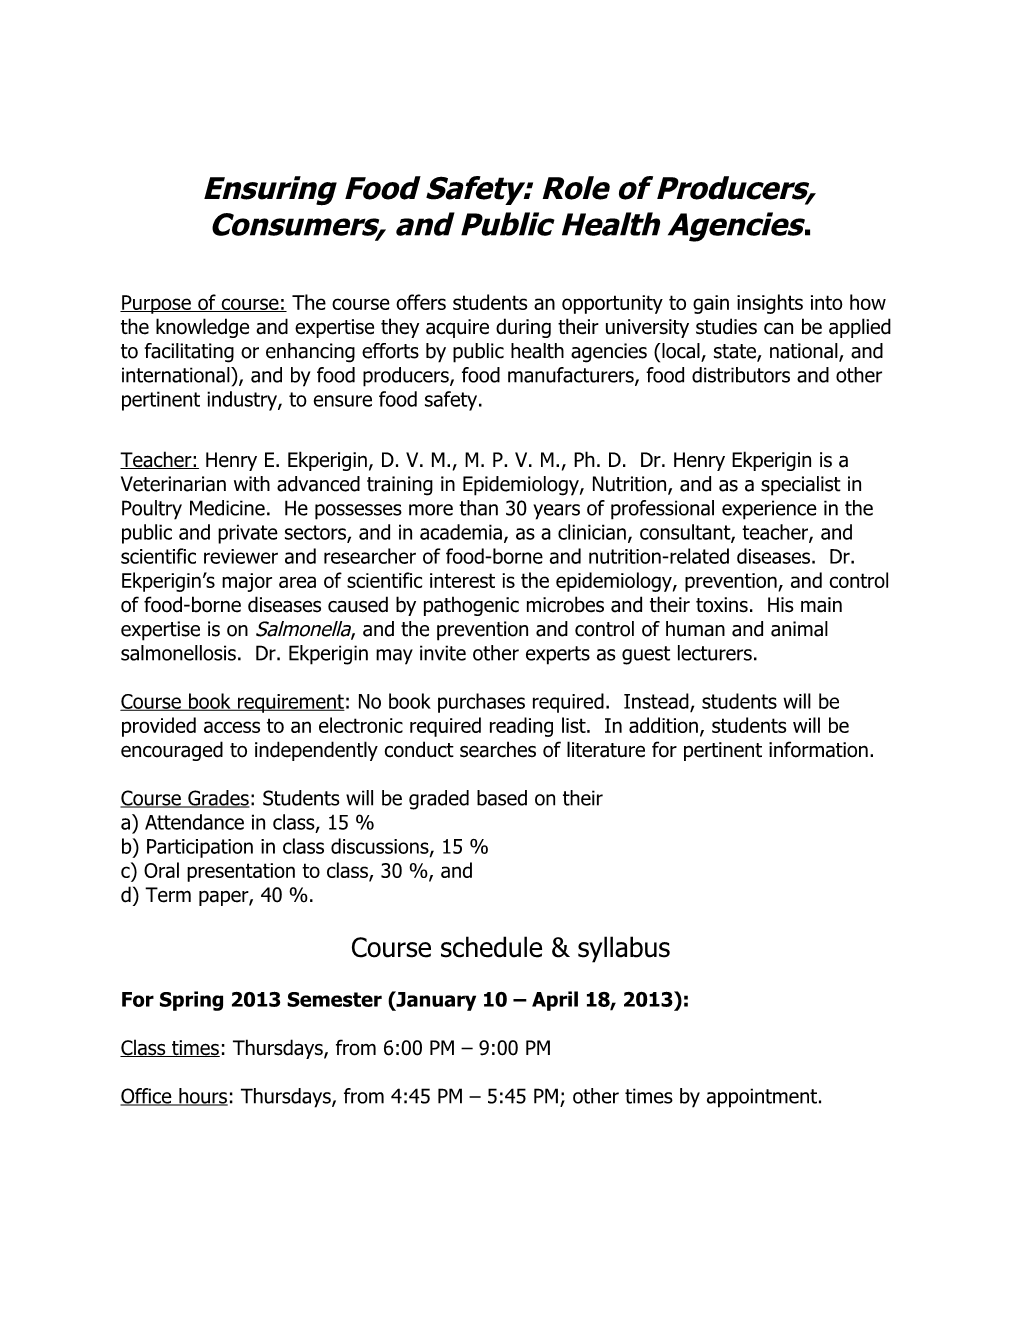 Ensuring Food Safety: Role of Producers, Consumers, and Public Health Agencies